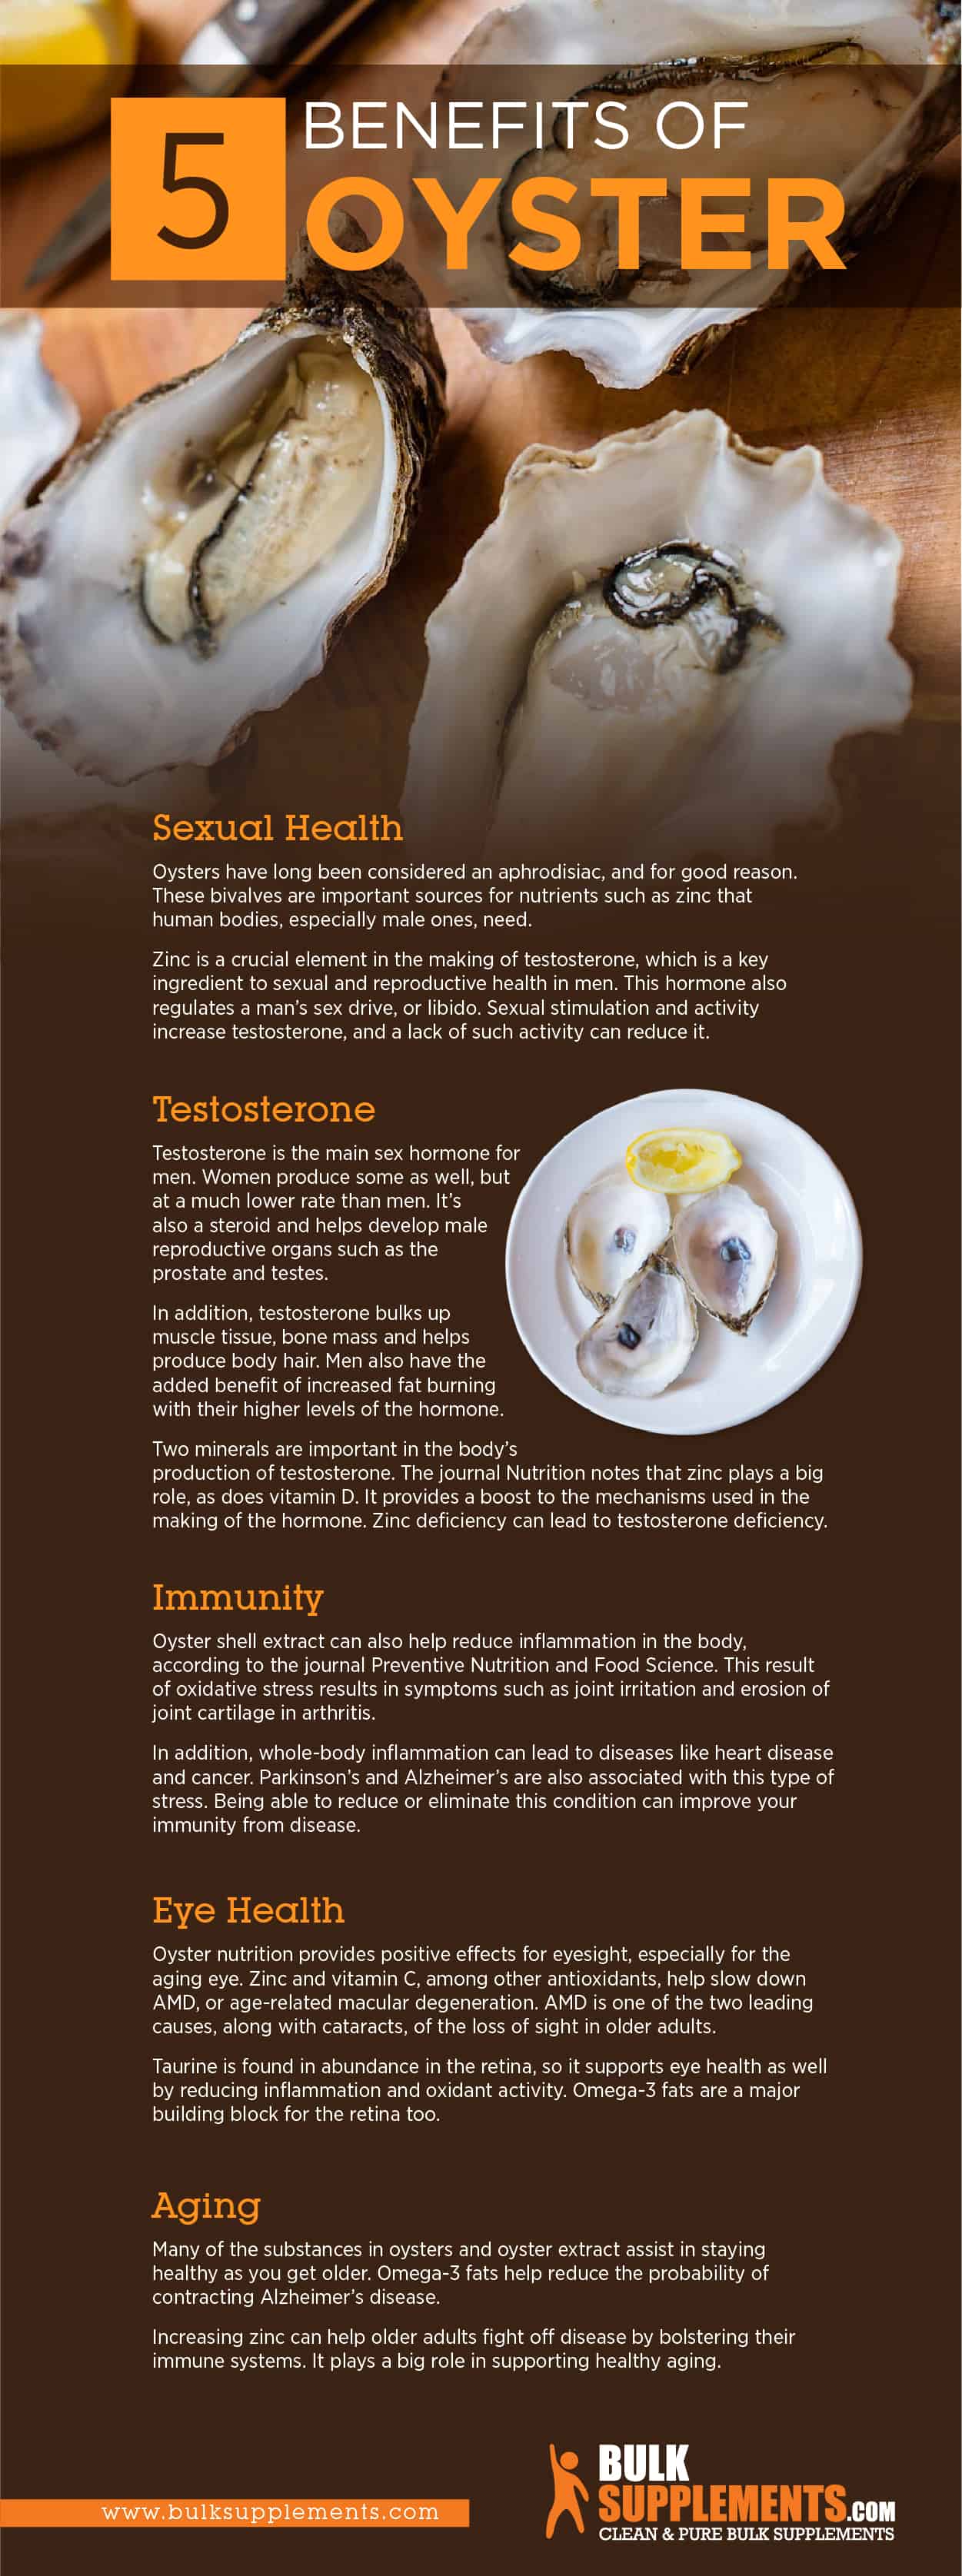 Oyster benefits infographic